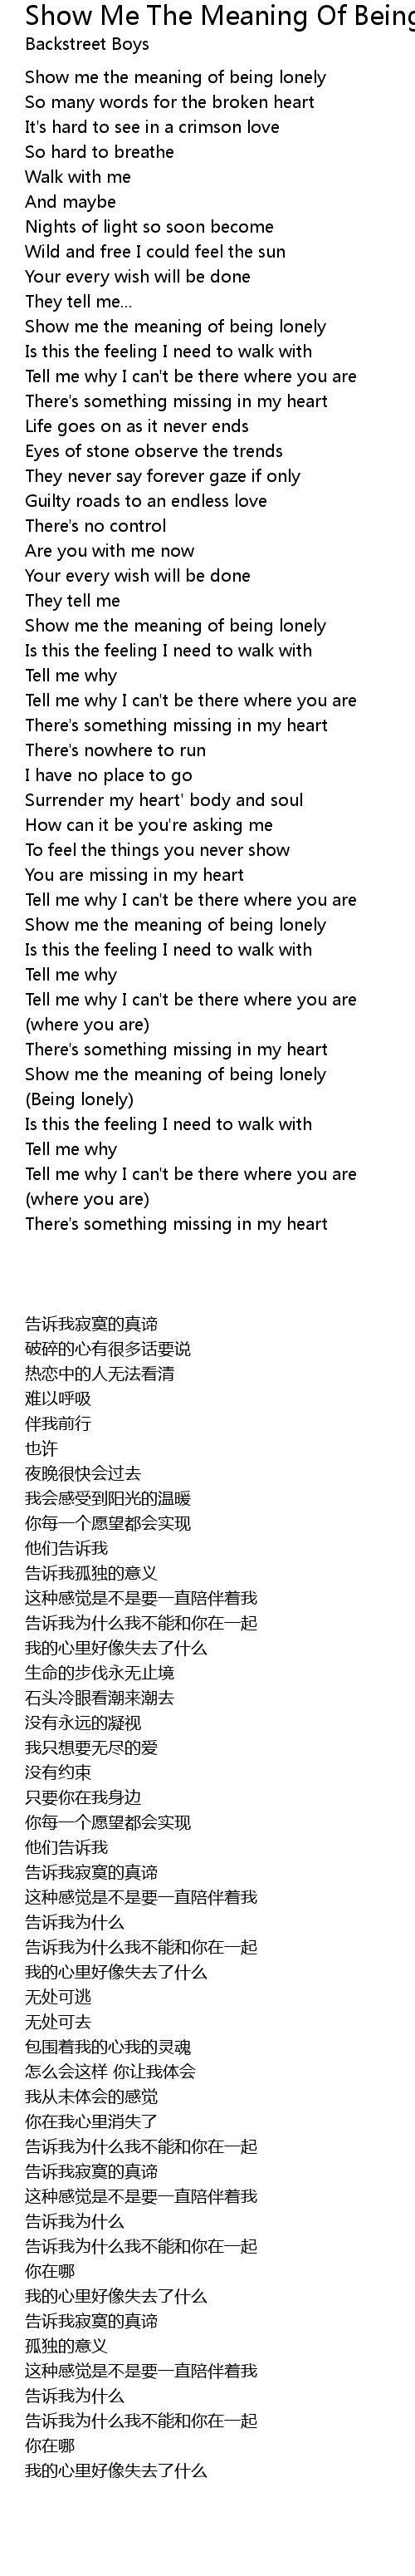 show me the meaning of being lonely lyrics meaning